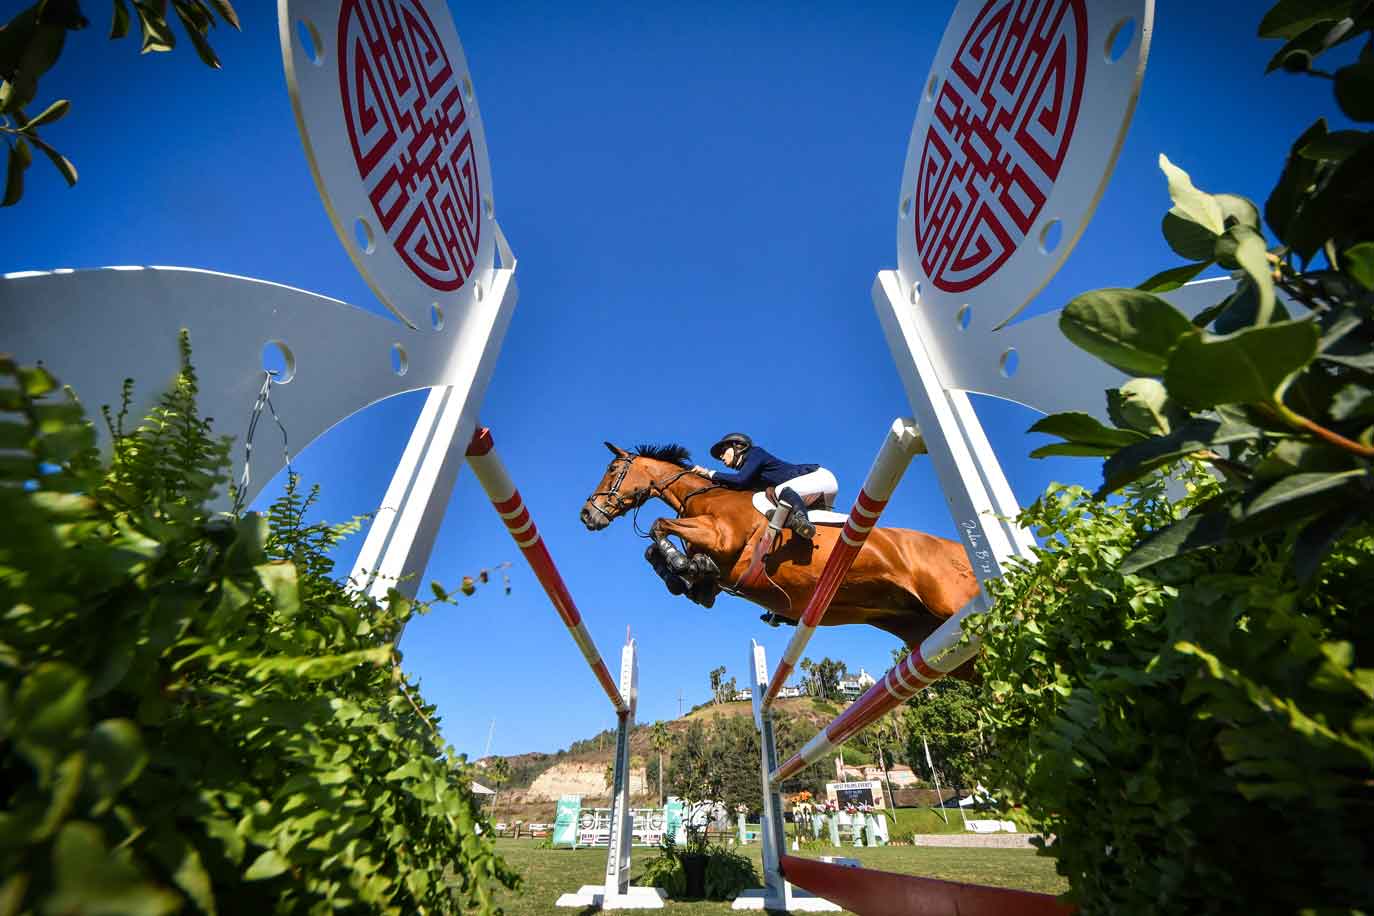 Horse jumping with blue sky